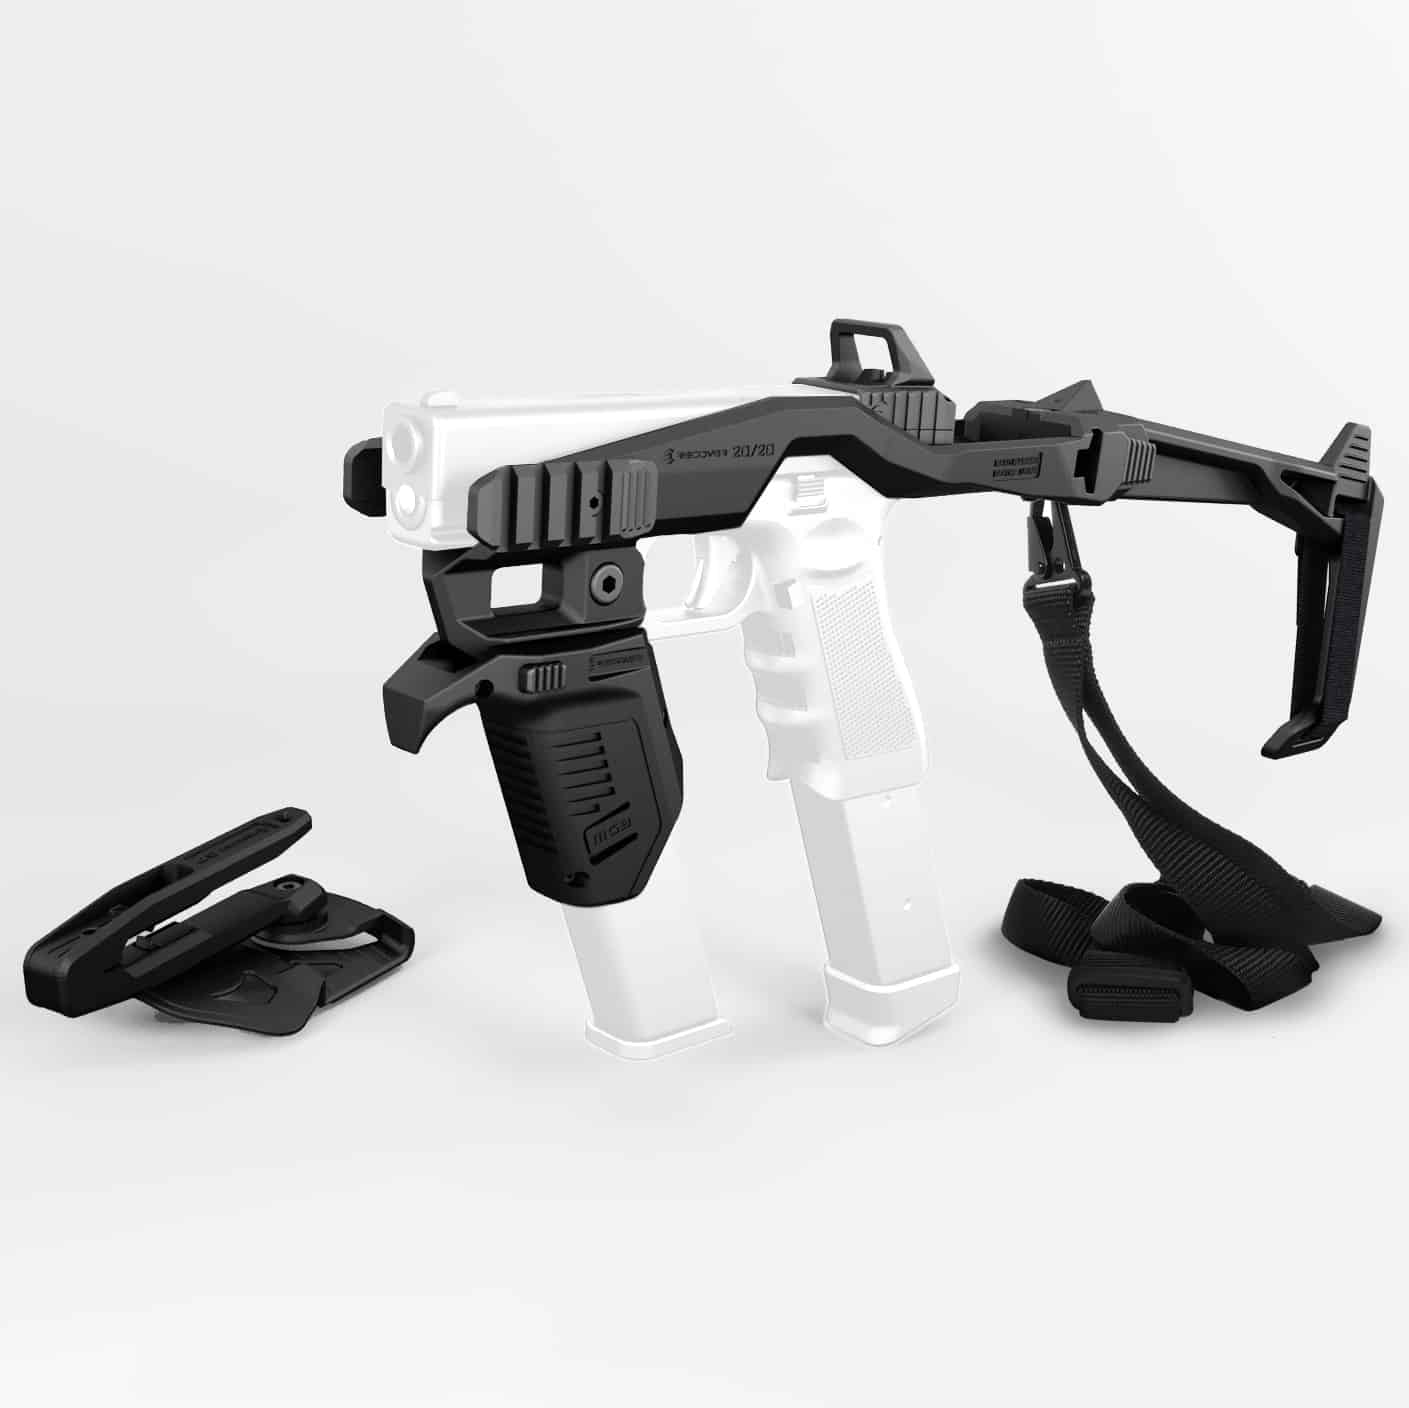 Recover Tactical 20/20 Stabilizer Brace Conversion Kit for Glock 